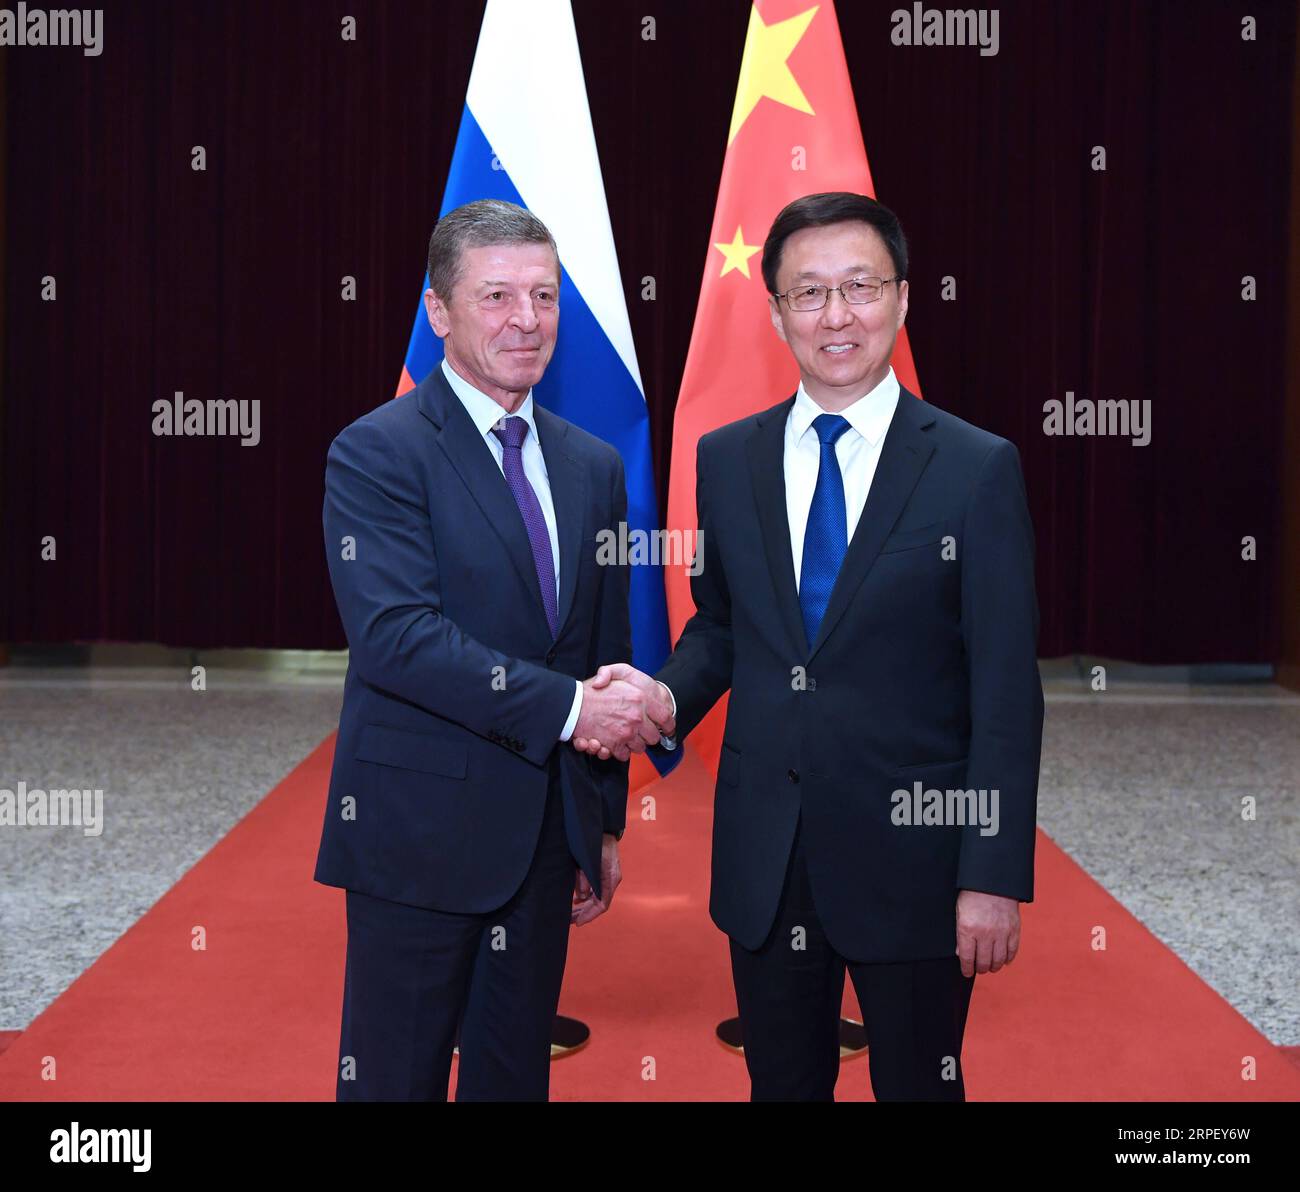 190906 -- BEIJING, Sept. 6, 2019 -- Chinese Vice Premier Han Zheng, also a member of the Standing Committee of the Political Bureau of the Communist Party of China Central Committee, meets with Russian Deputy Prime Minister Dmitry Kozak in Beijing, capital of China, Sept. 6, 2019. Han and Kozak co-chaired the 16th meeting of the China-Russia Energy Cooperation Committee in Beijing on Friday.  CHINA-BEIJING-HAN ZHENG-DMITRY KOZAK-MEETING CN RaoxAimin PUBLICATIONxNOTxINxCHN Stock Photo